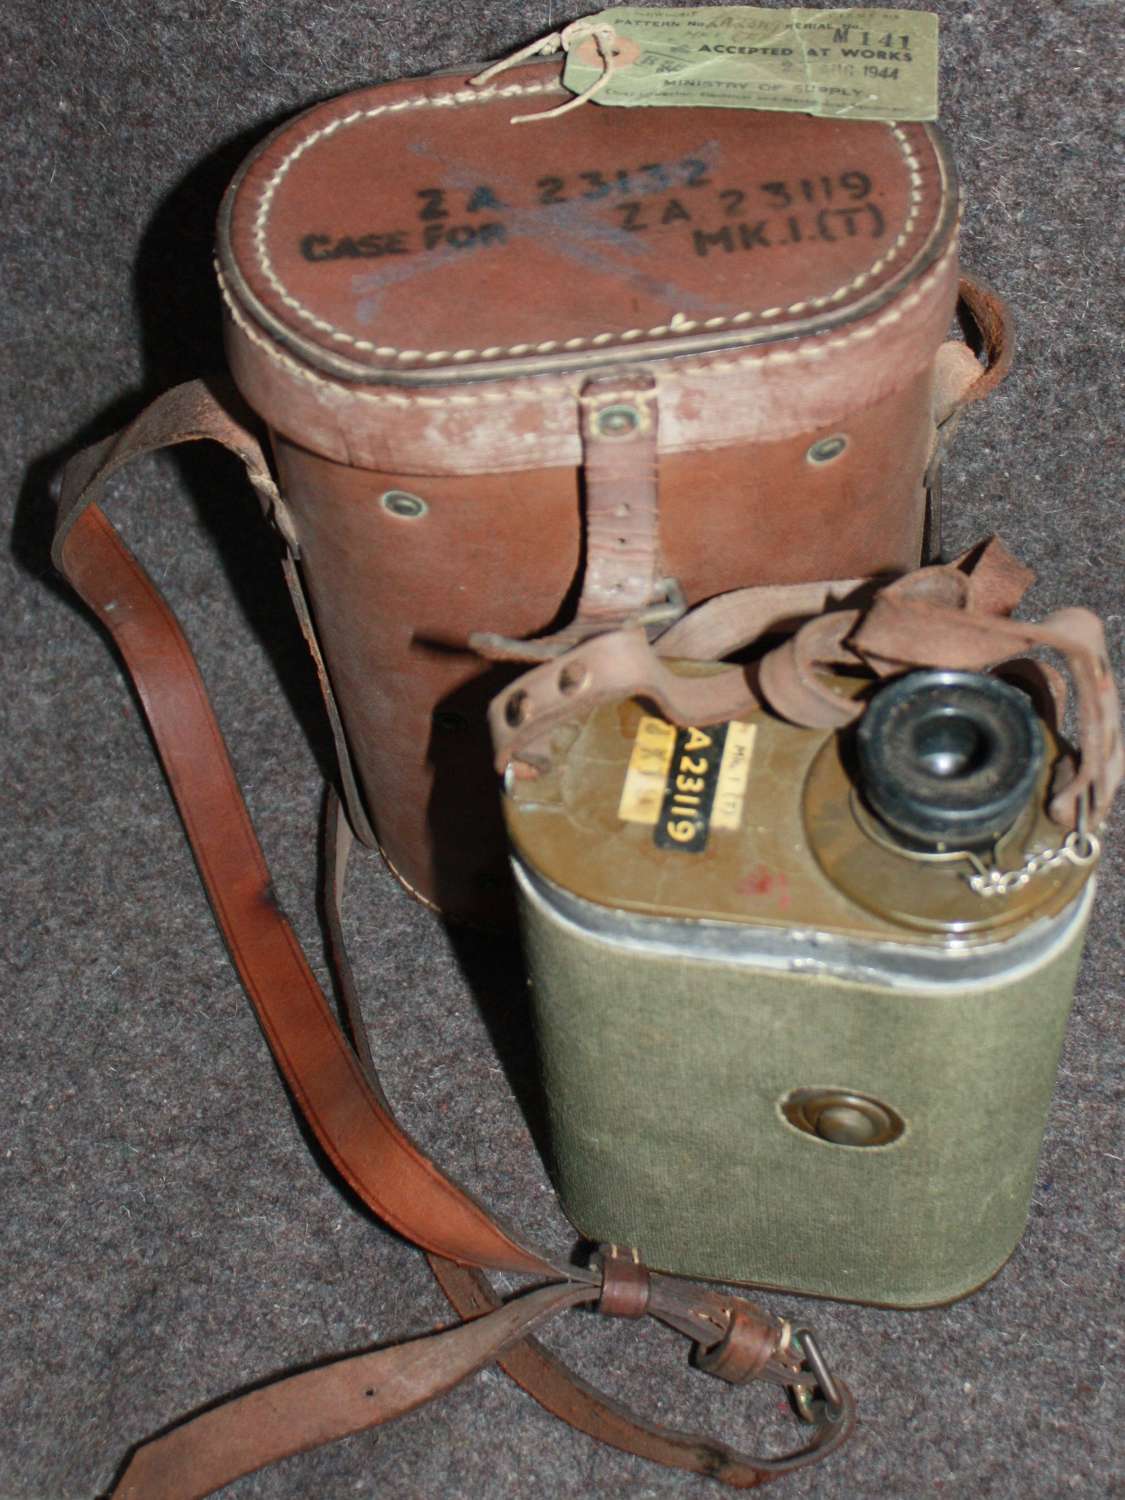 A WWII INFERRED TABBY IN ITS CASE